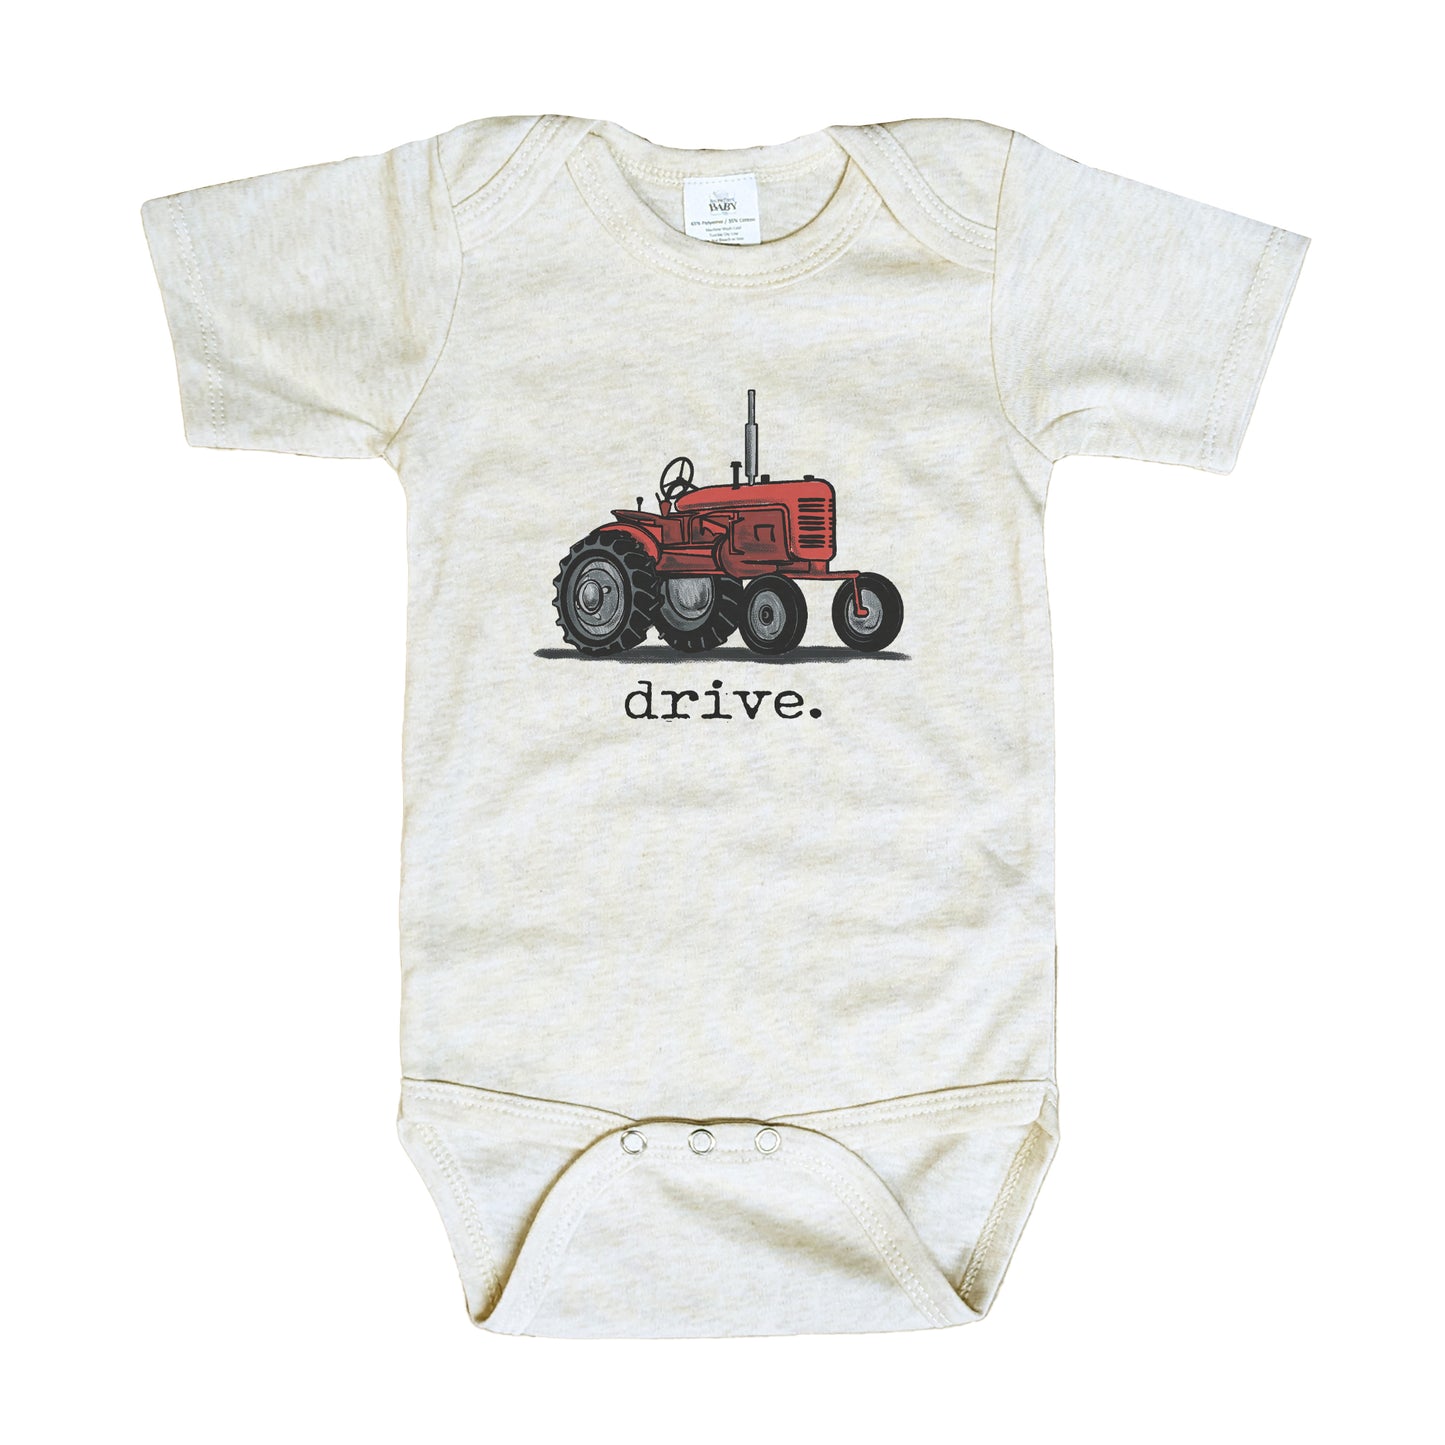 "Drive" Red Tractor Beige Baby Body suit